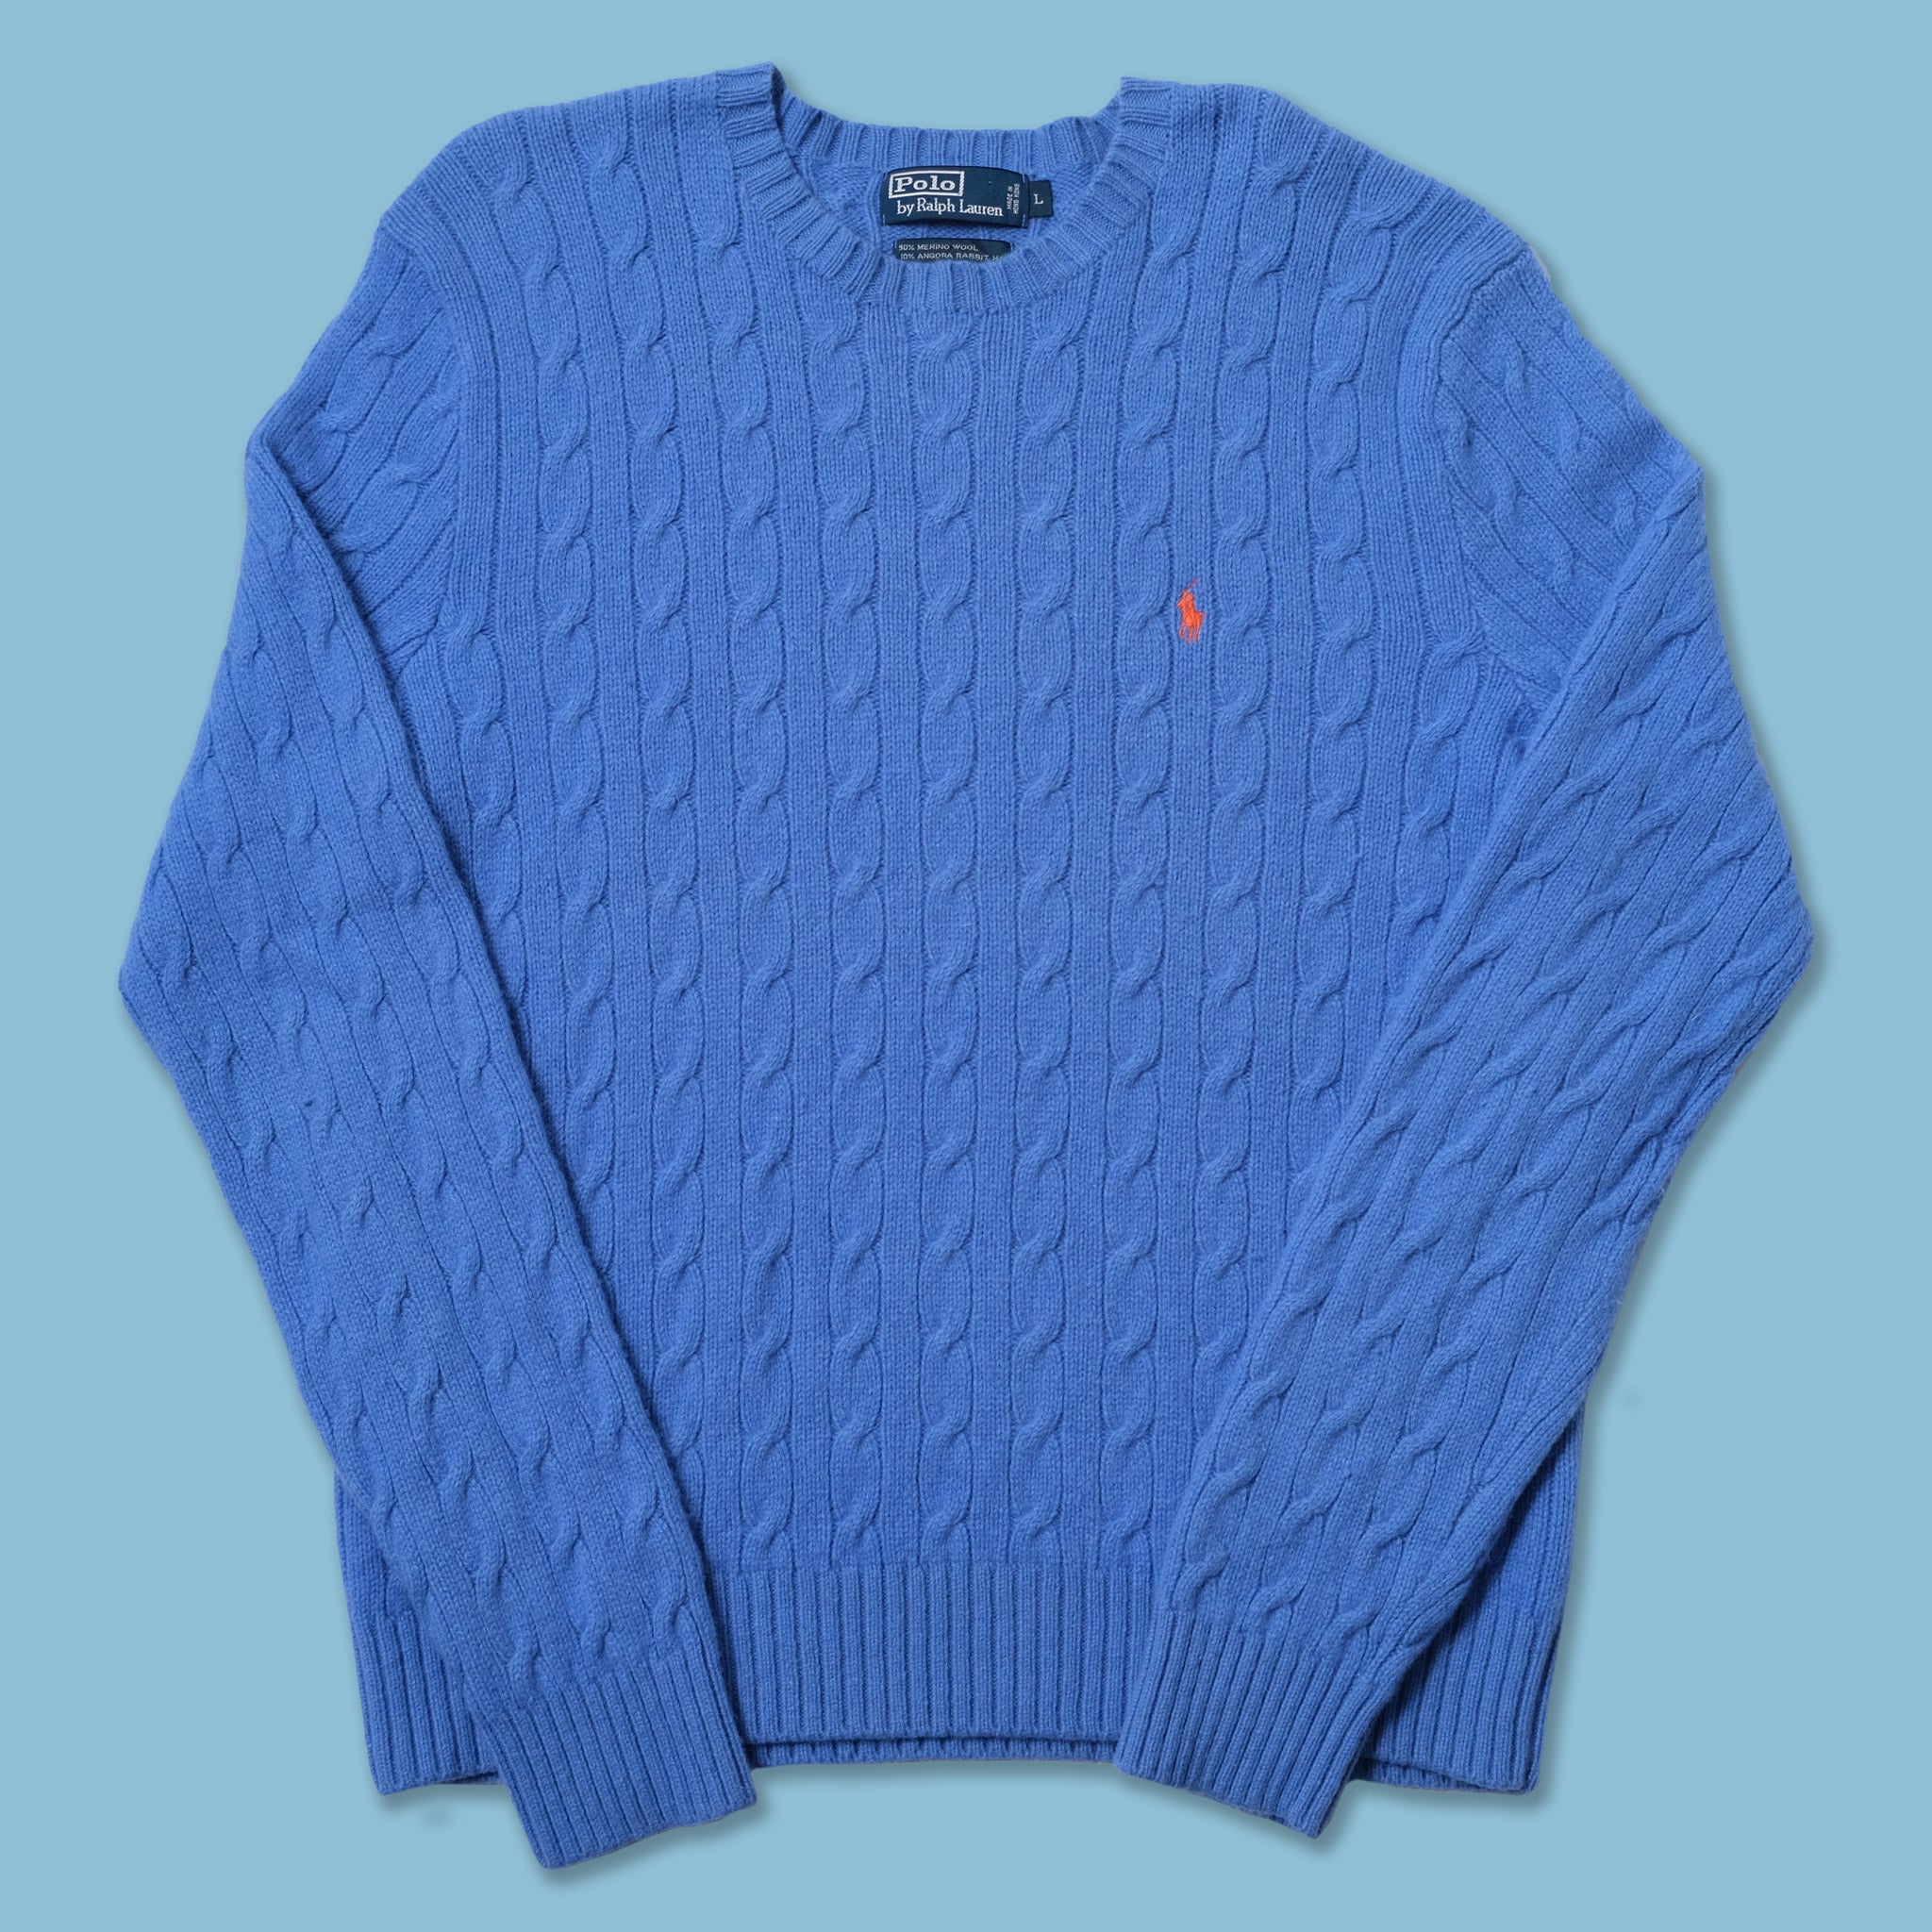 polo sweater vintage